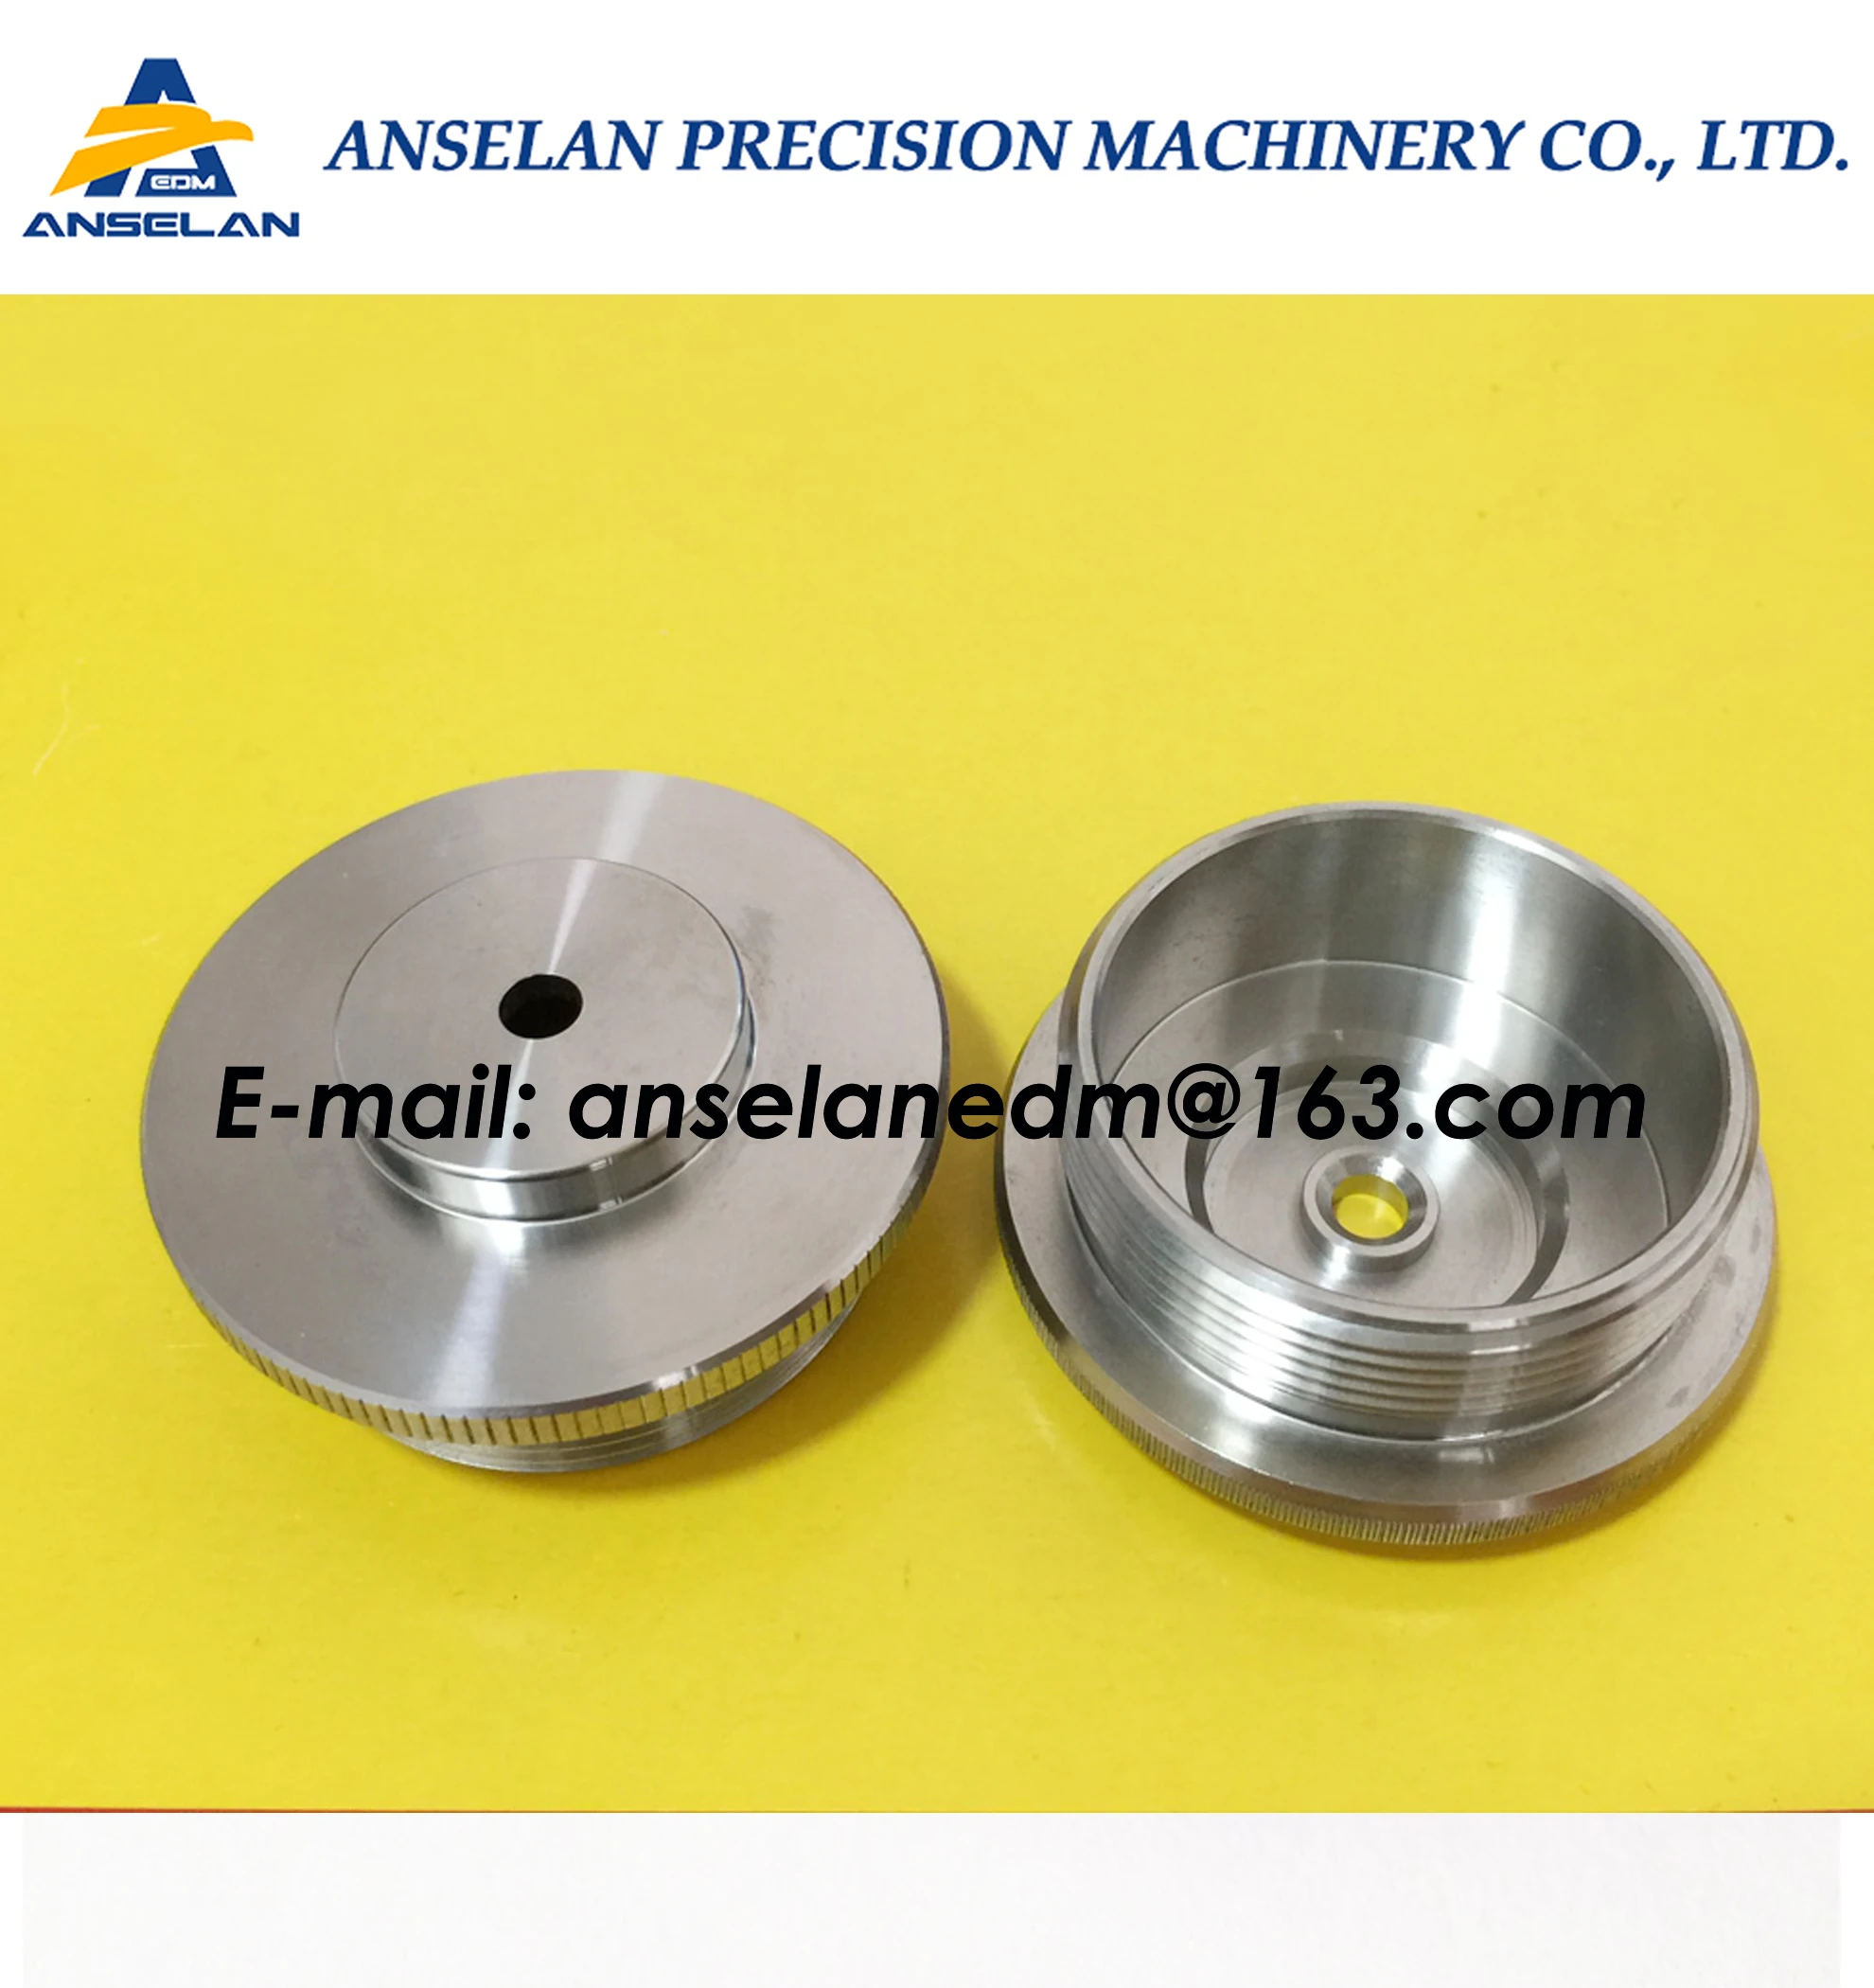 20EC920A401 Nozzle Guard (Stainless steel type). EDM Spare Parts Laminar nozzle guard 20EC920A401=01 for DUO43,DUO64 high speed